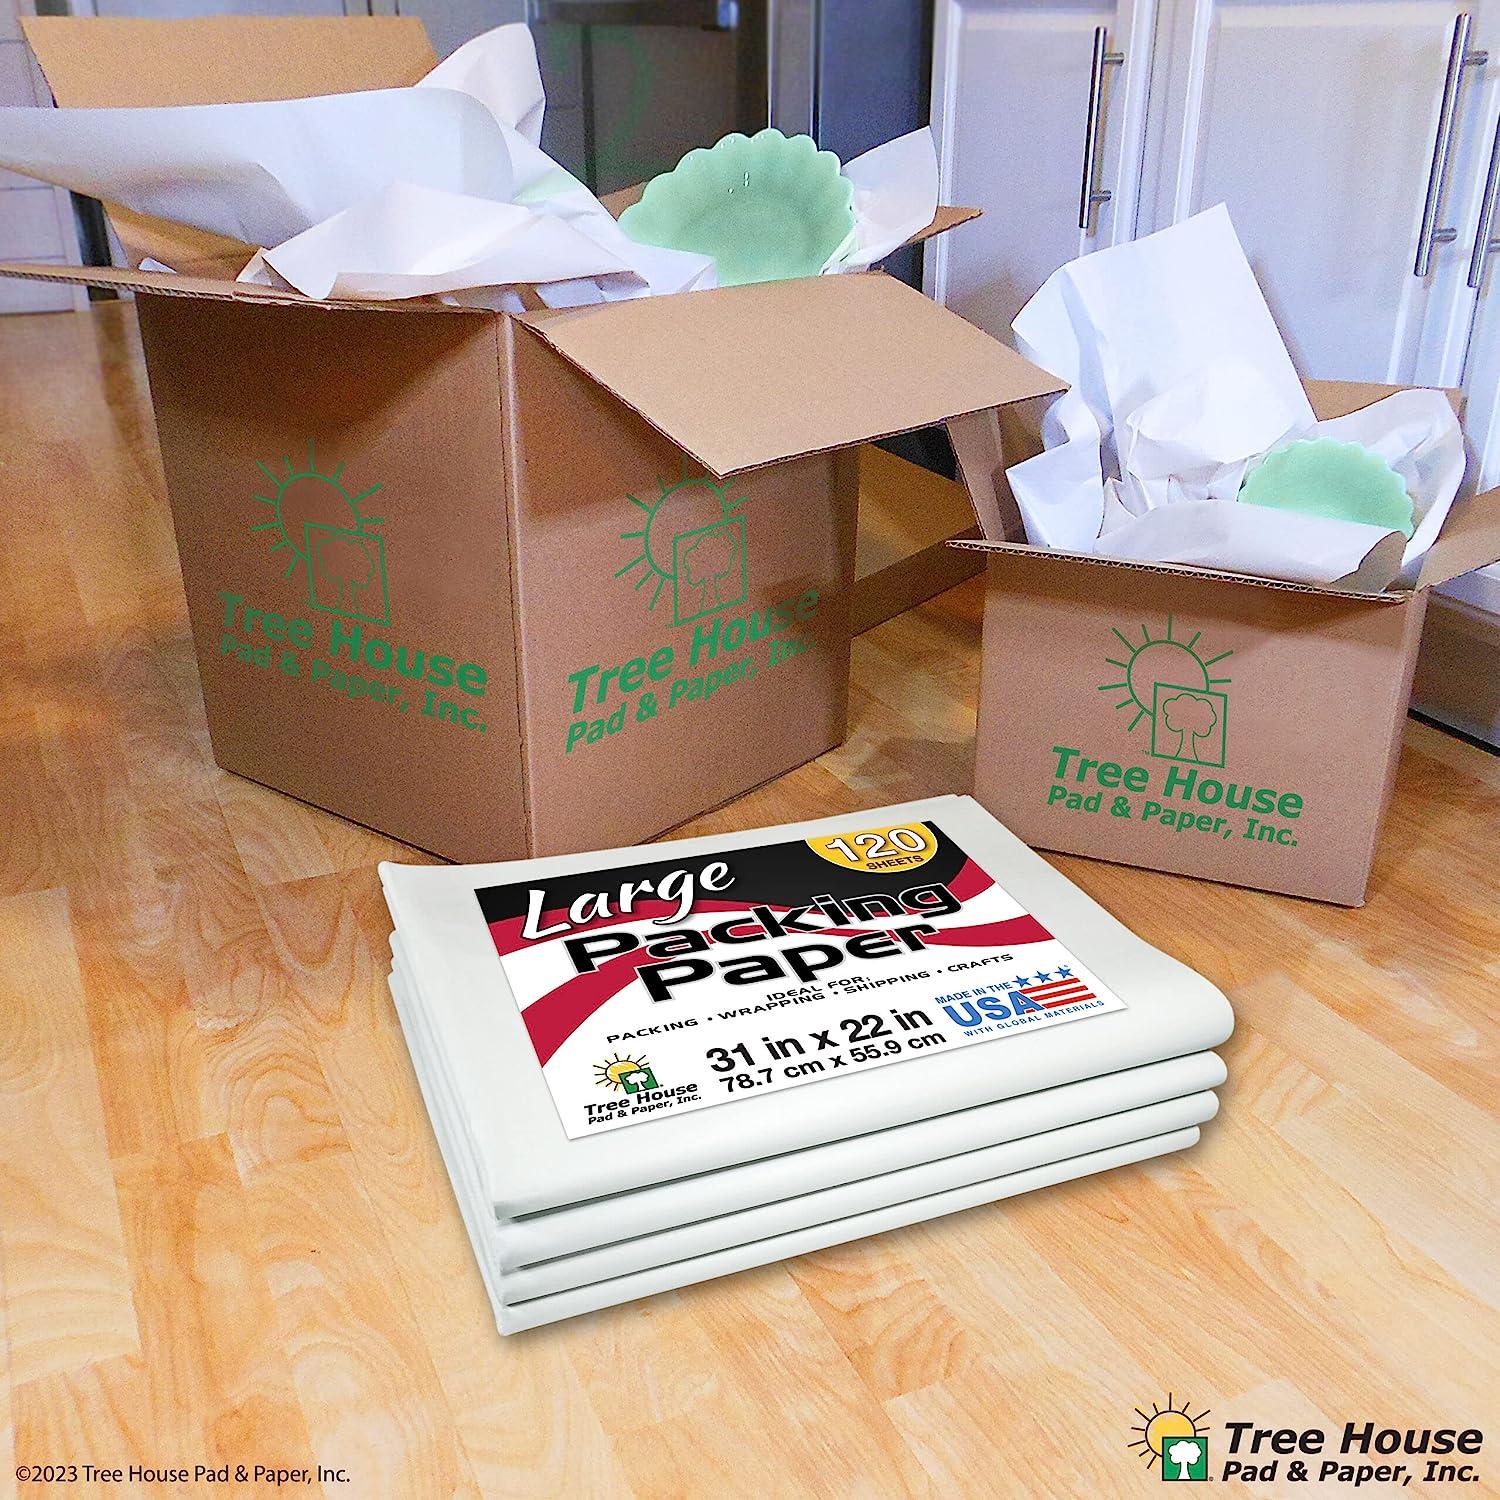 Packing Paper for Moving,120 Sheets Newsprint Paper Sheets for